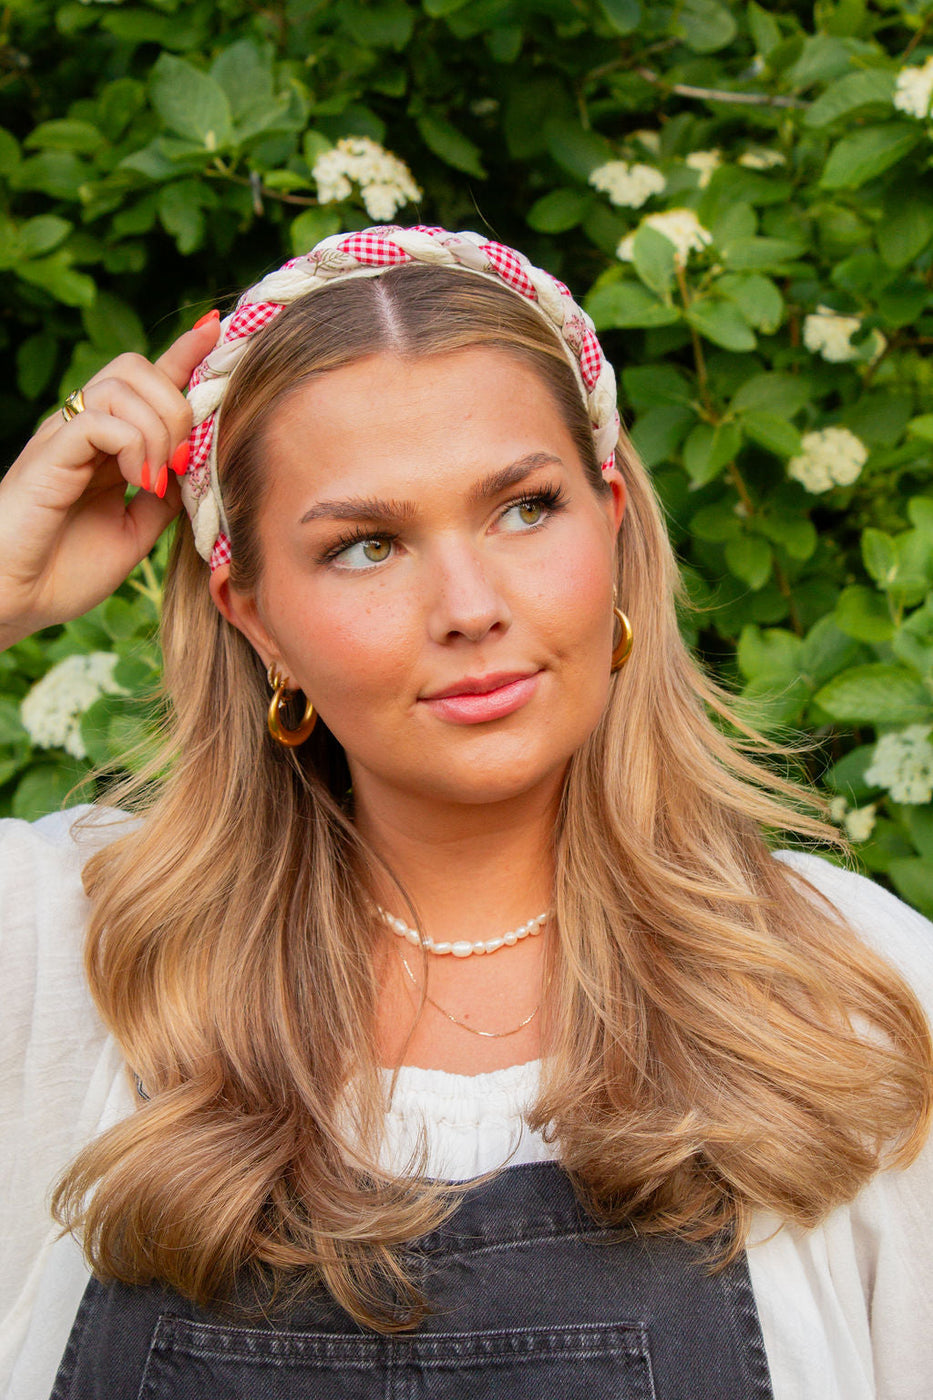 a woman with blonde hair wearing a headband and earrings